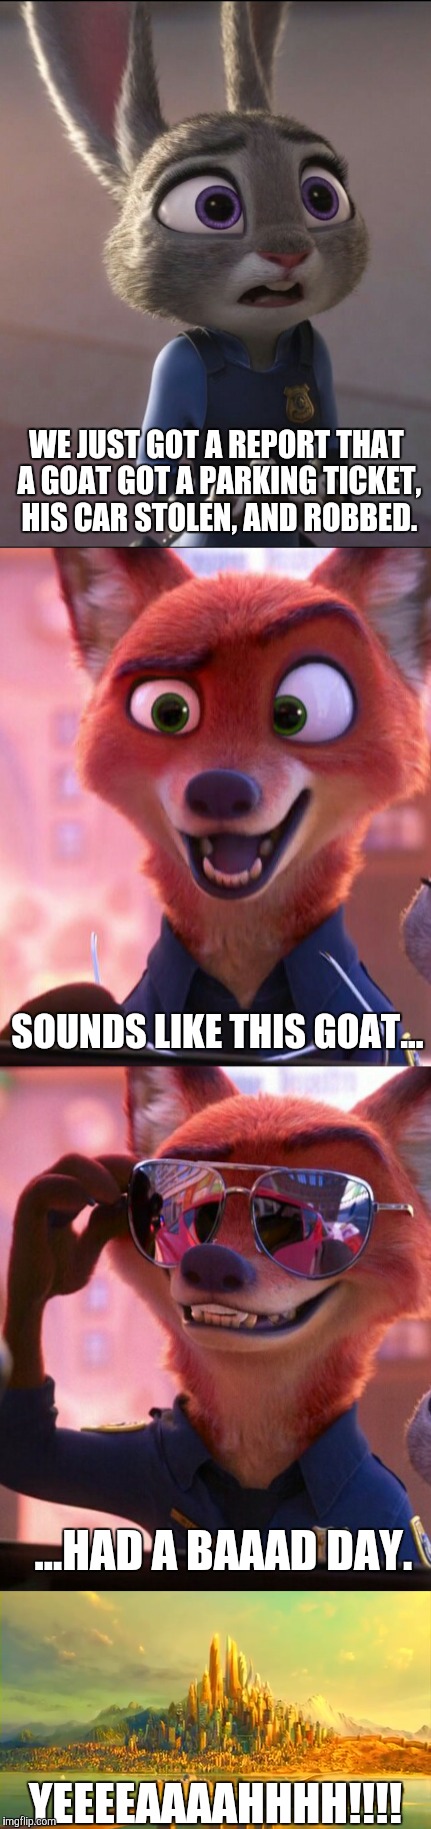 CSI: Zootopia 7 | WE JUST GOT A REPORT THAT A GOAT GOT A PARKING TICKET, HIS CAR STOLEN, AND ROBBED. SOUNDS LIKE THIS GOAT... ...HAD A BAAAD DAY. YEEEEAAAAHHHH!!!! | image tagged in zootopia,judy hopps,nick wilde,parody,funny,memes | made w/ Imgflip meme maker